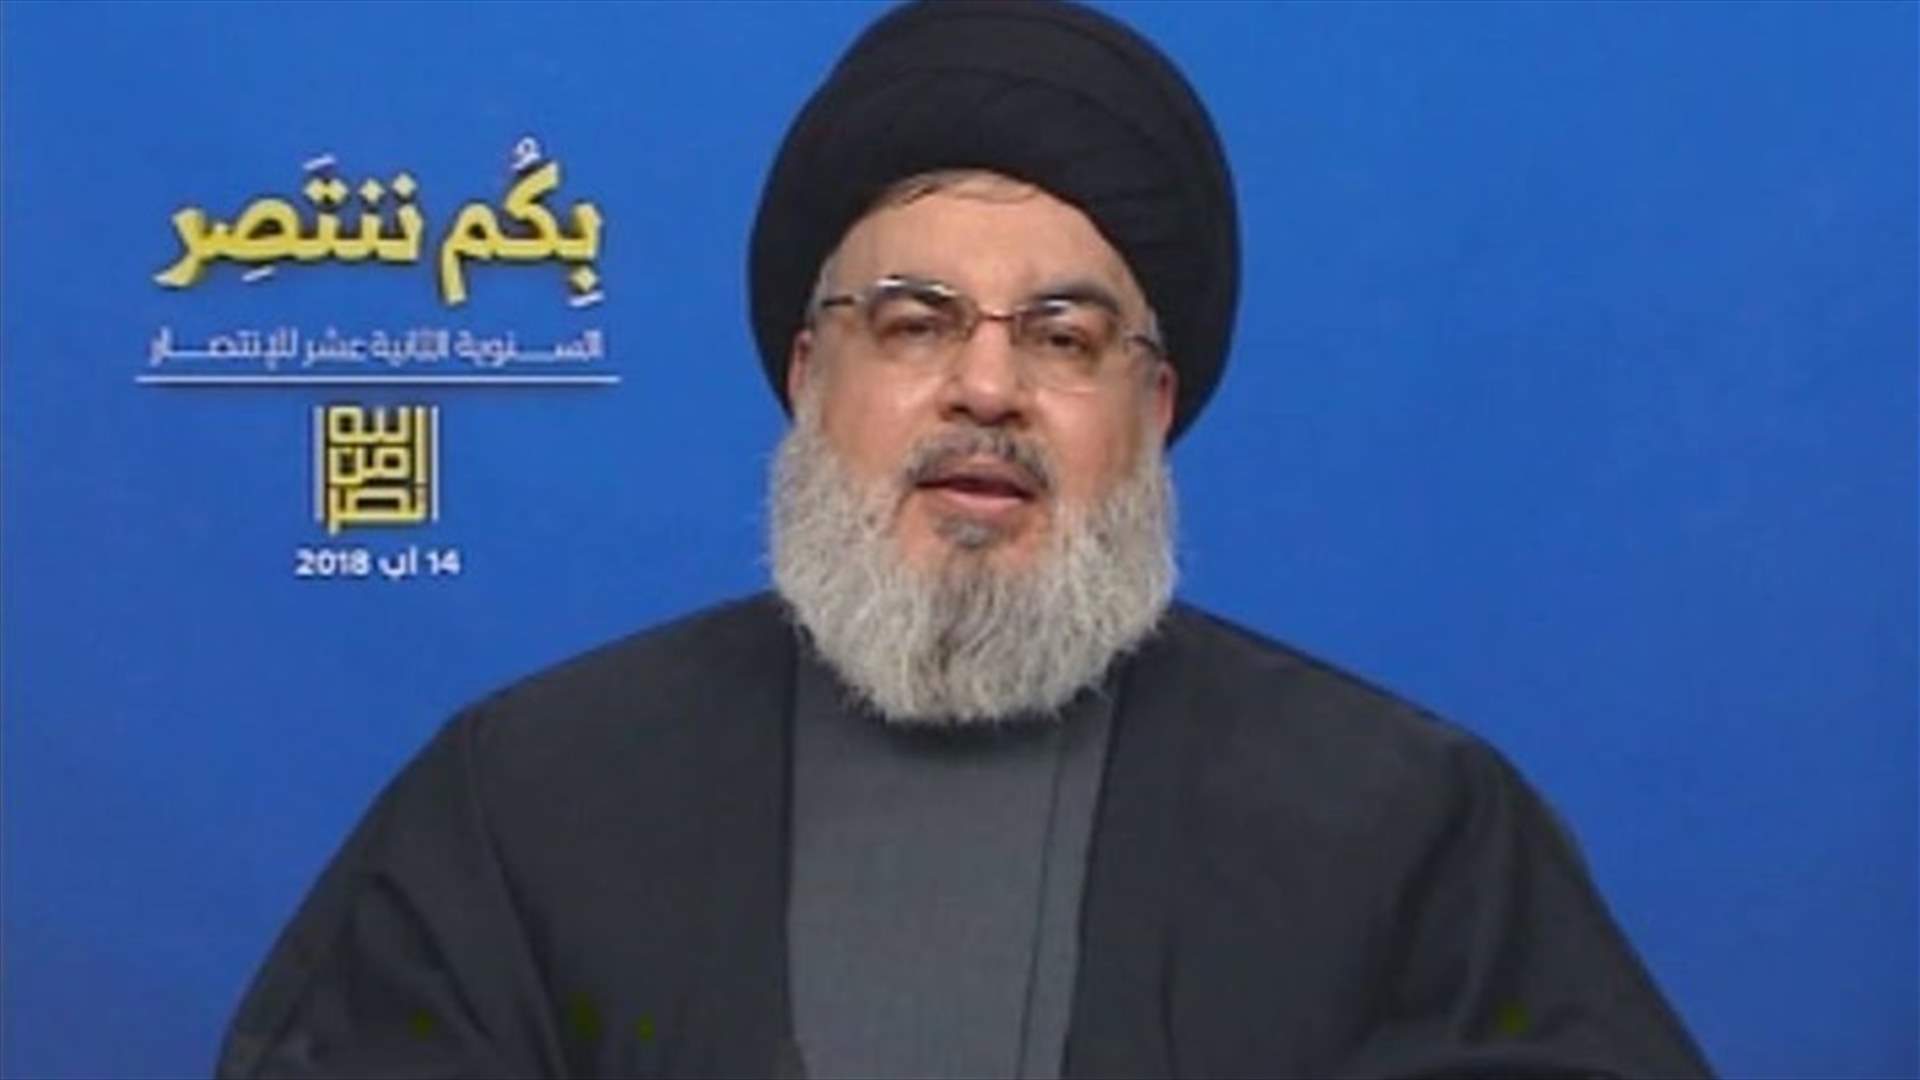 Nasrallah: Waiting for regional changes to form cabinet does not serve interest of those betting on it